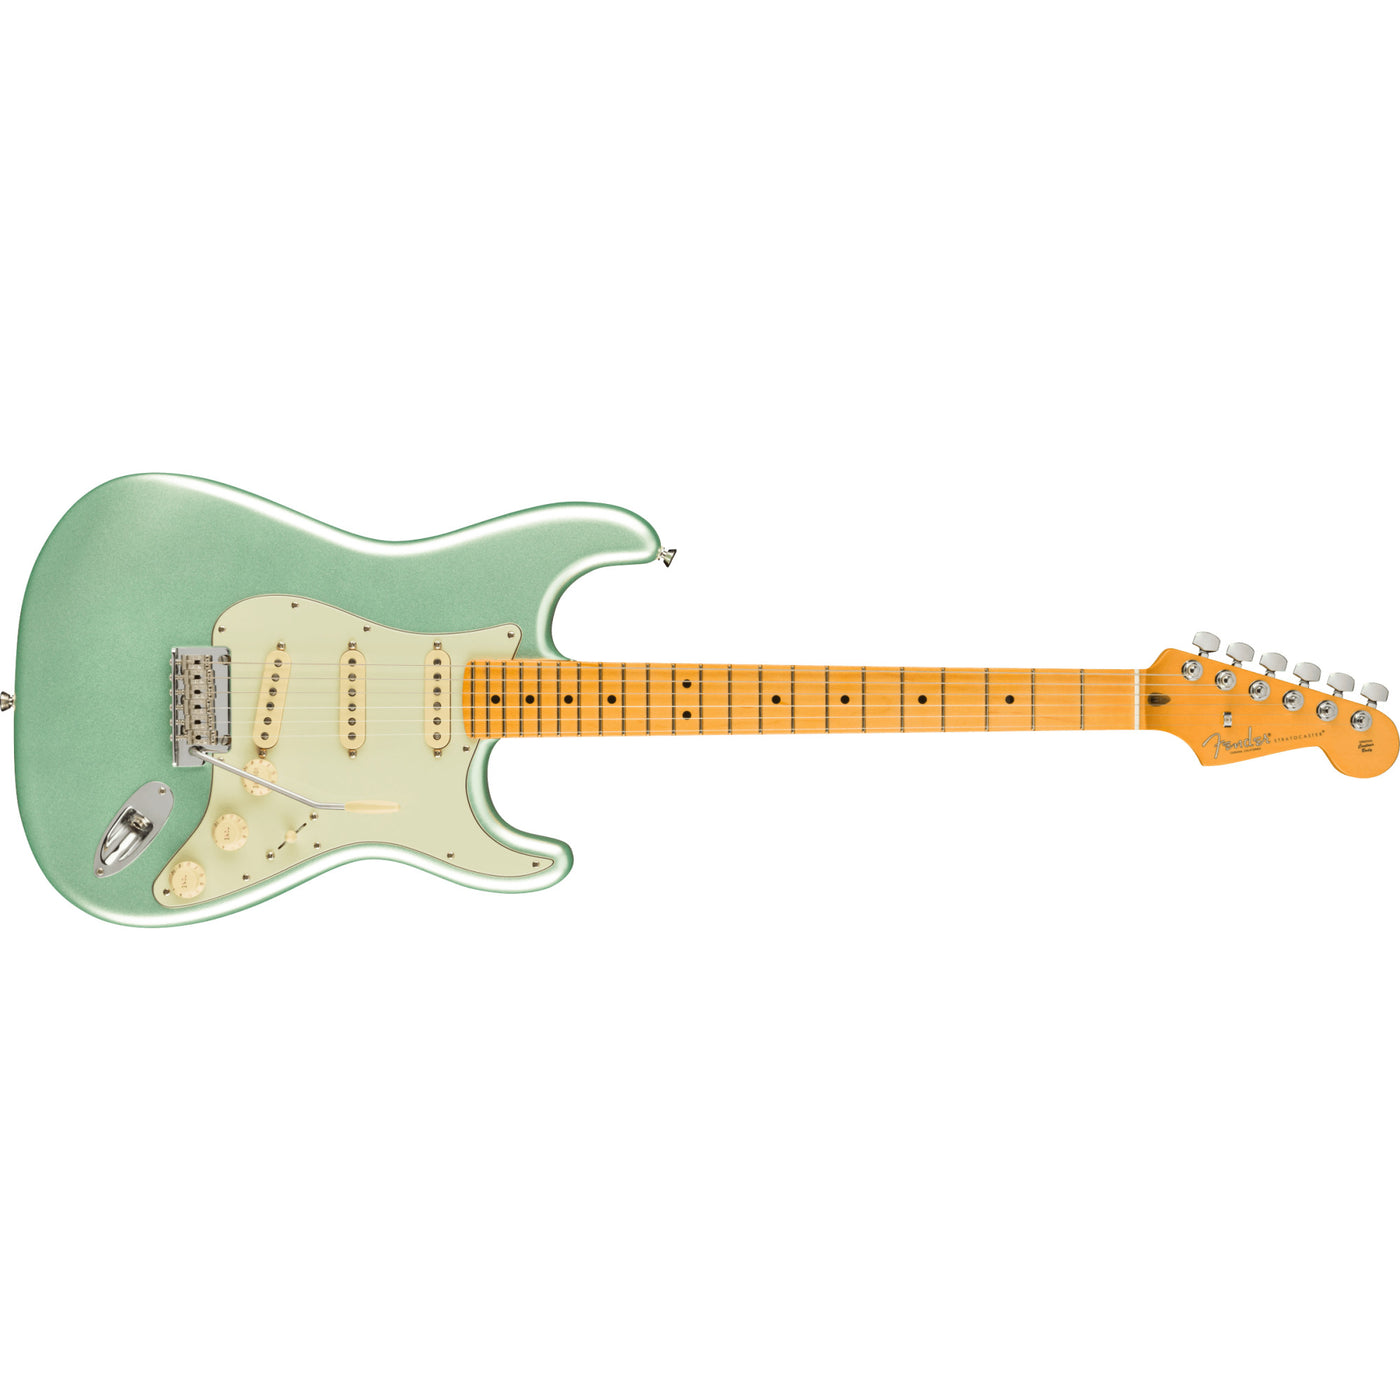 Fender American Professional ll Stratocaster Electric Guitar, Mystic Surf Green (0113902718)